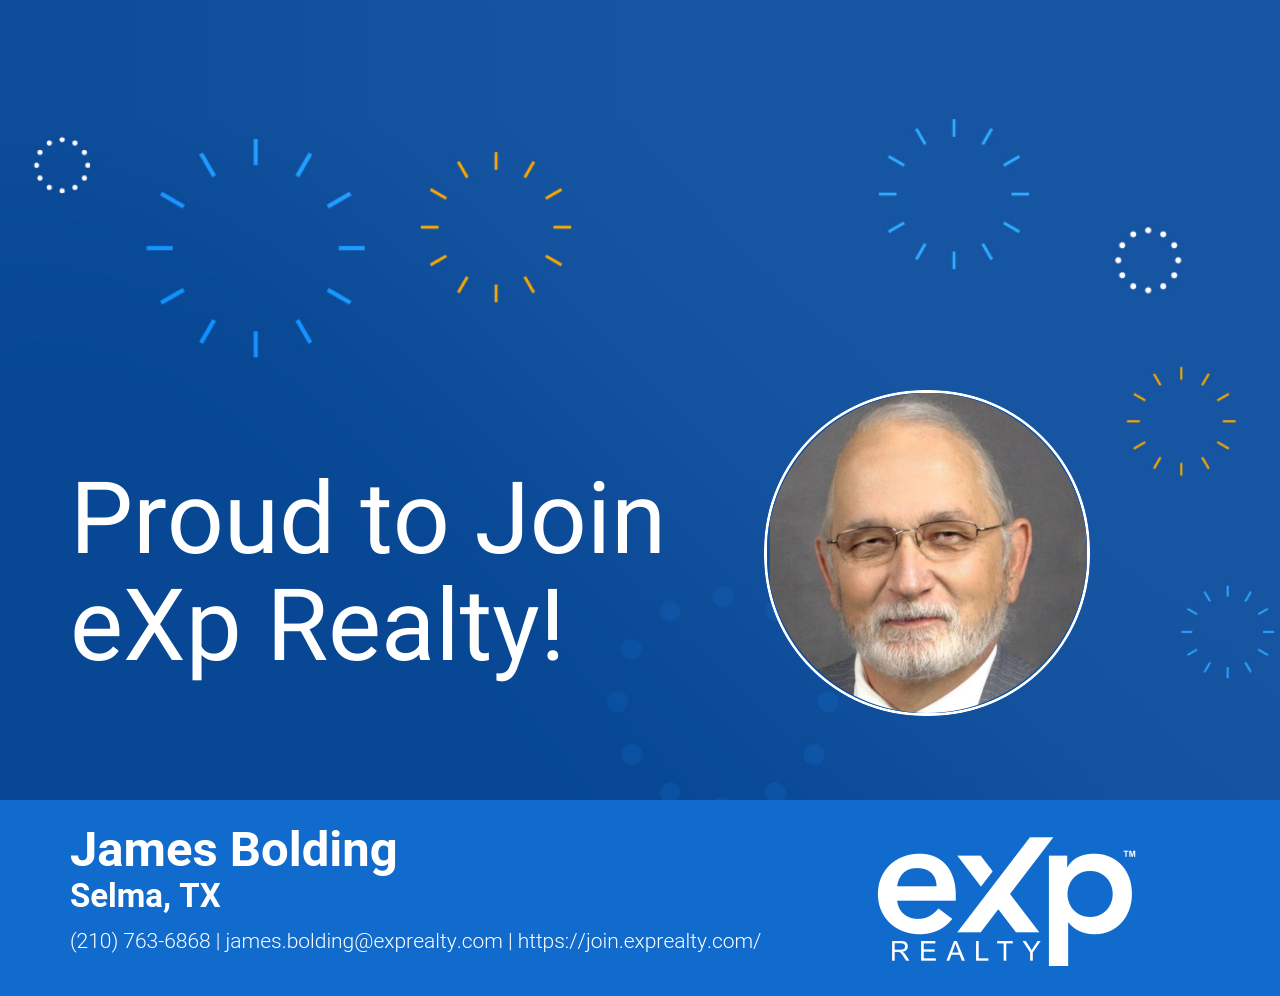 James Bolding Joined eXp Realty!